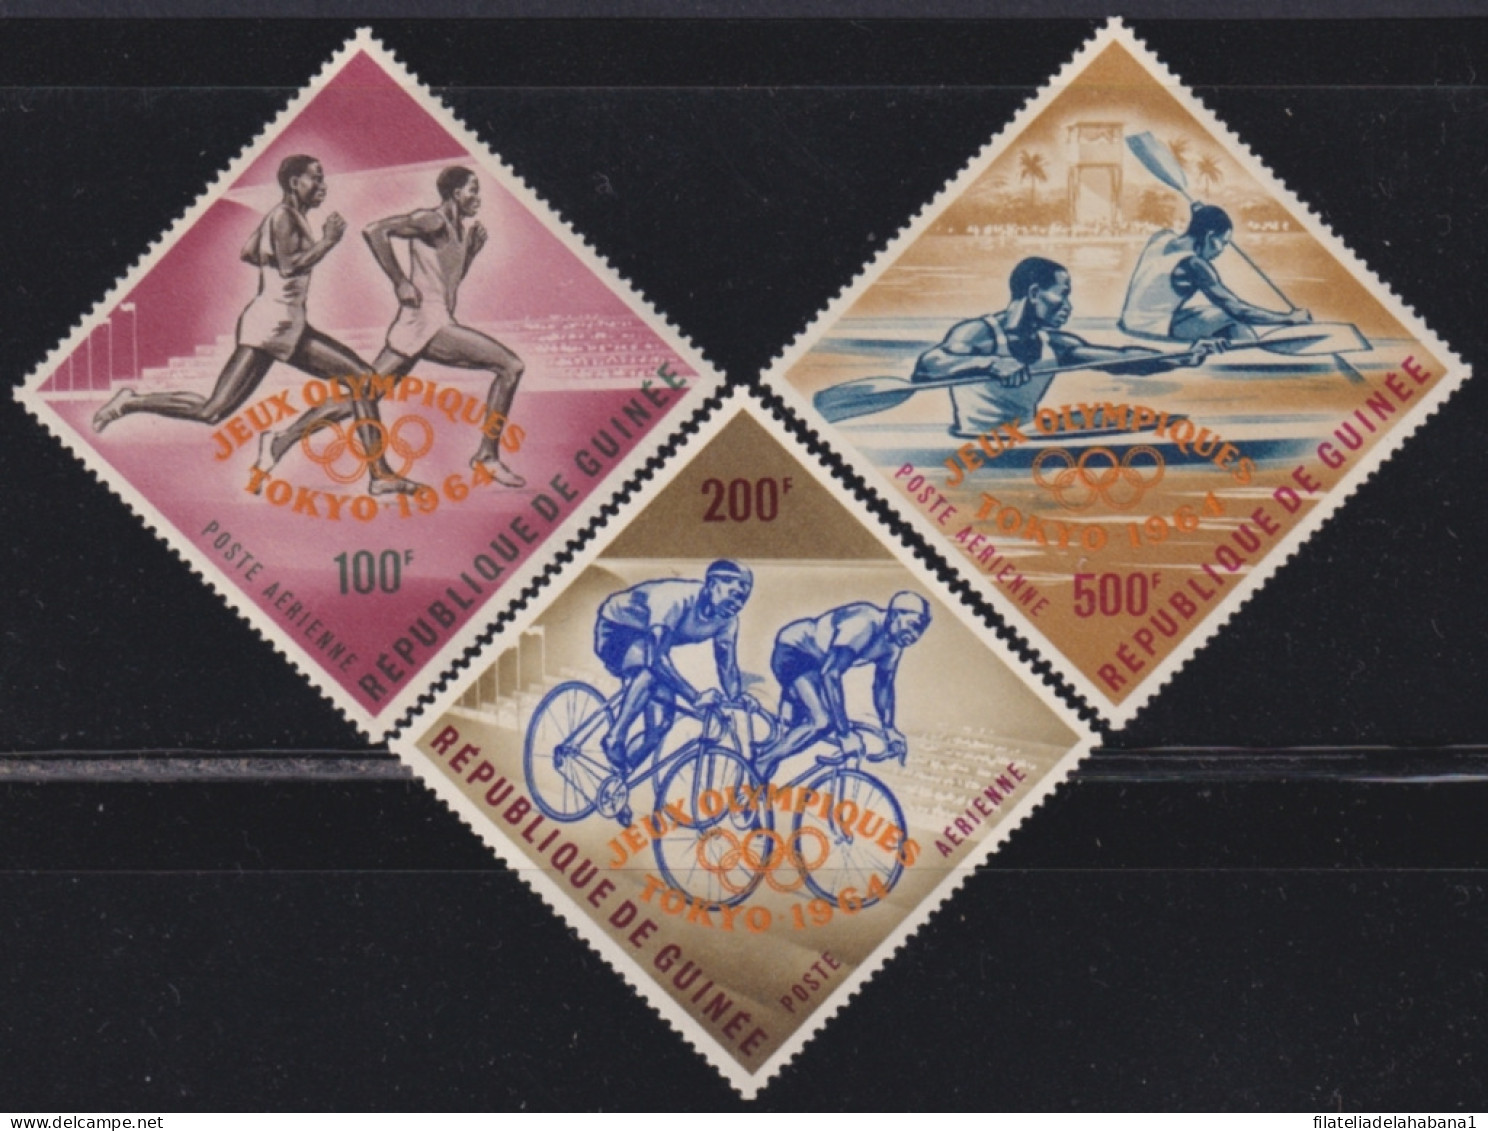 F-EX49269 GUINEE GUINEA MNH 1968 TOKIO OLYMPIC GAMES OVERPRINT CICLYNG ATHLETISM.  - Ete 1968: Mexico